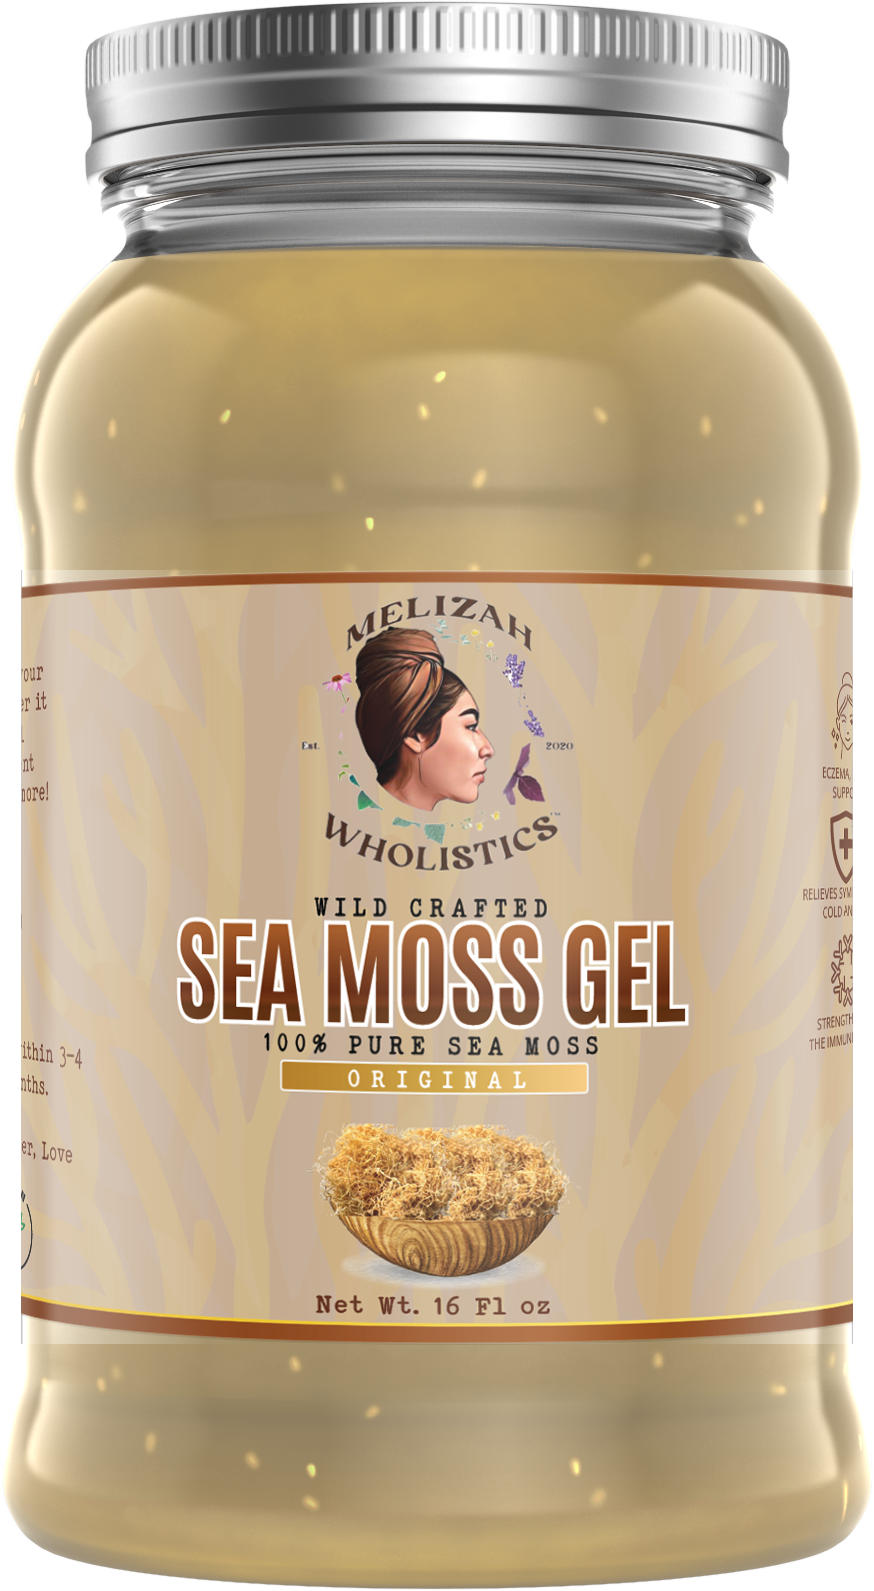 Sea Moss Gel 100% Pure (Wild-Crafted)